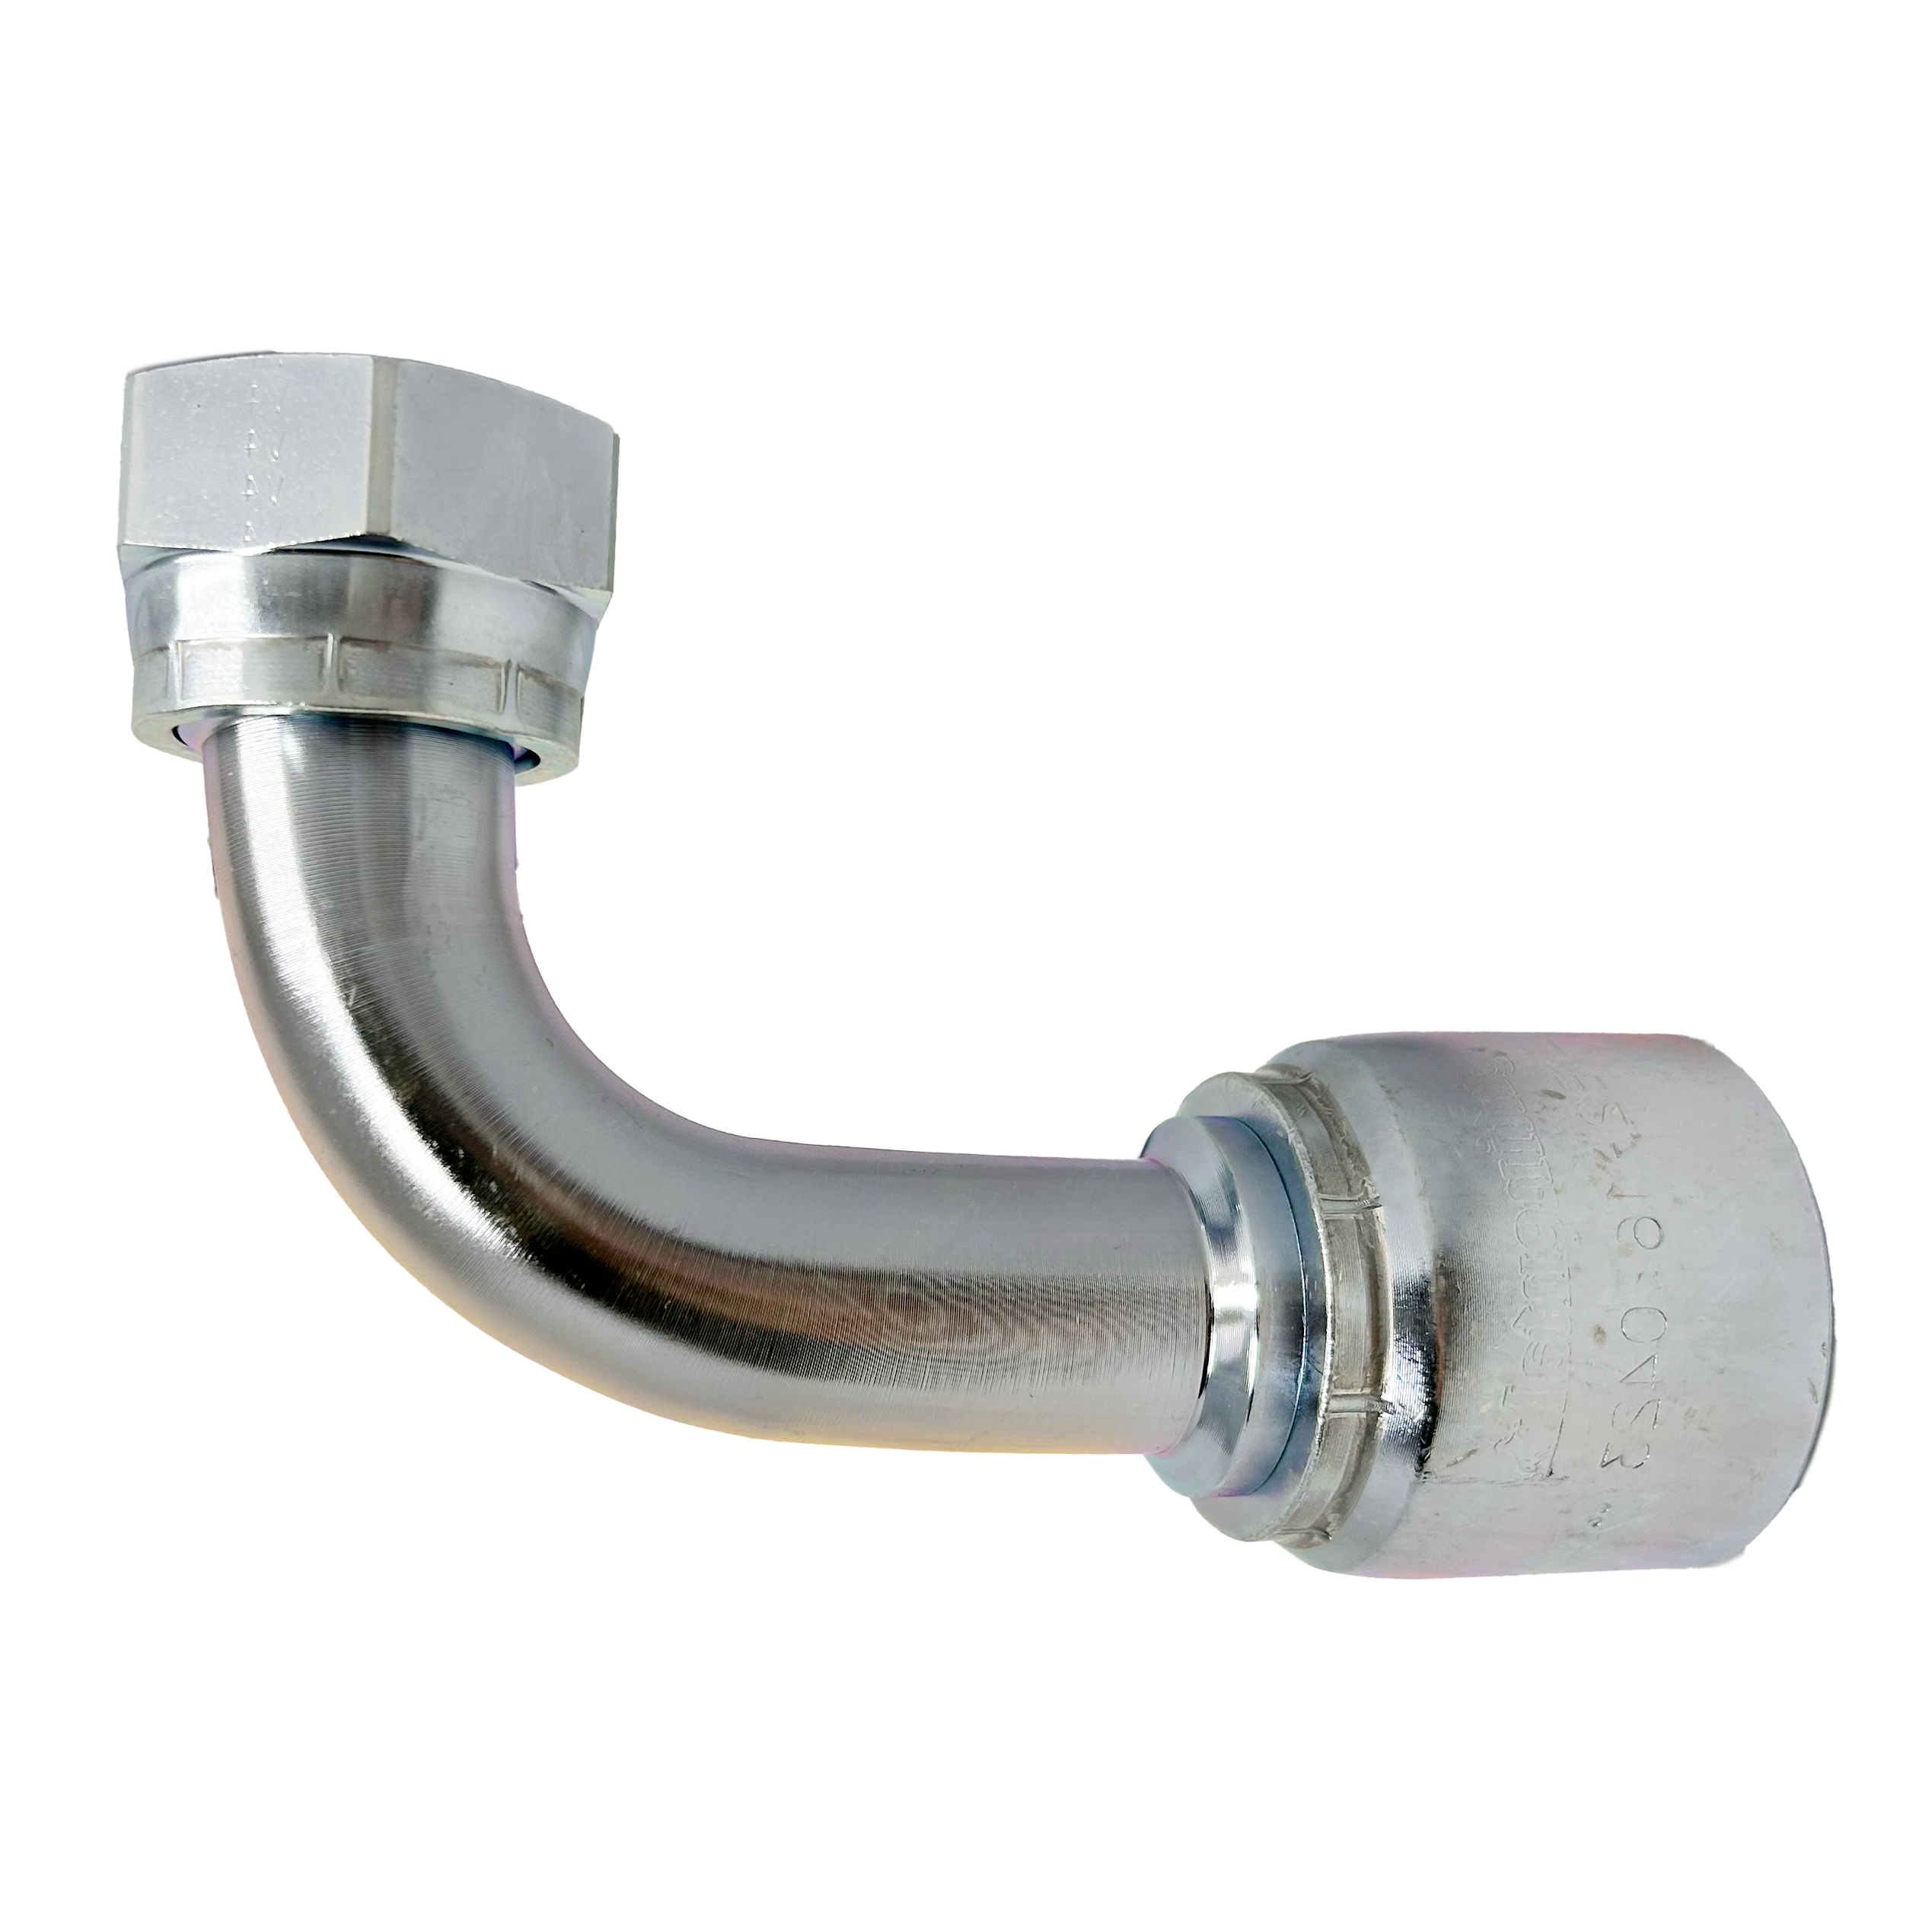 B2-OFFX90-1616: Continental Hose Fitting, 1" Hose ID x 1-7/16-12 Female ORFS, 90-Degree Swivel Connection